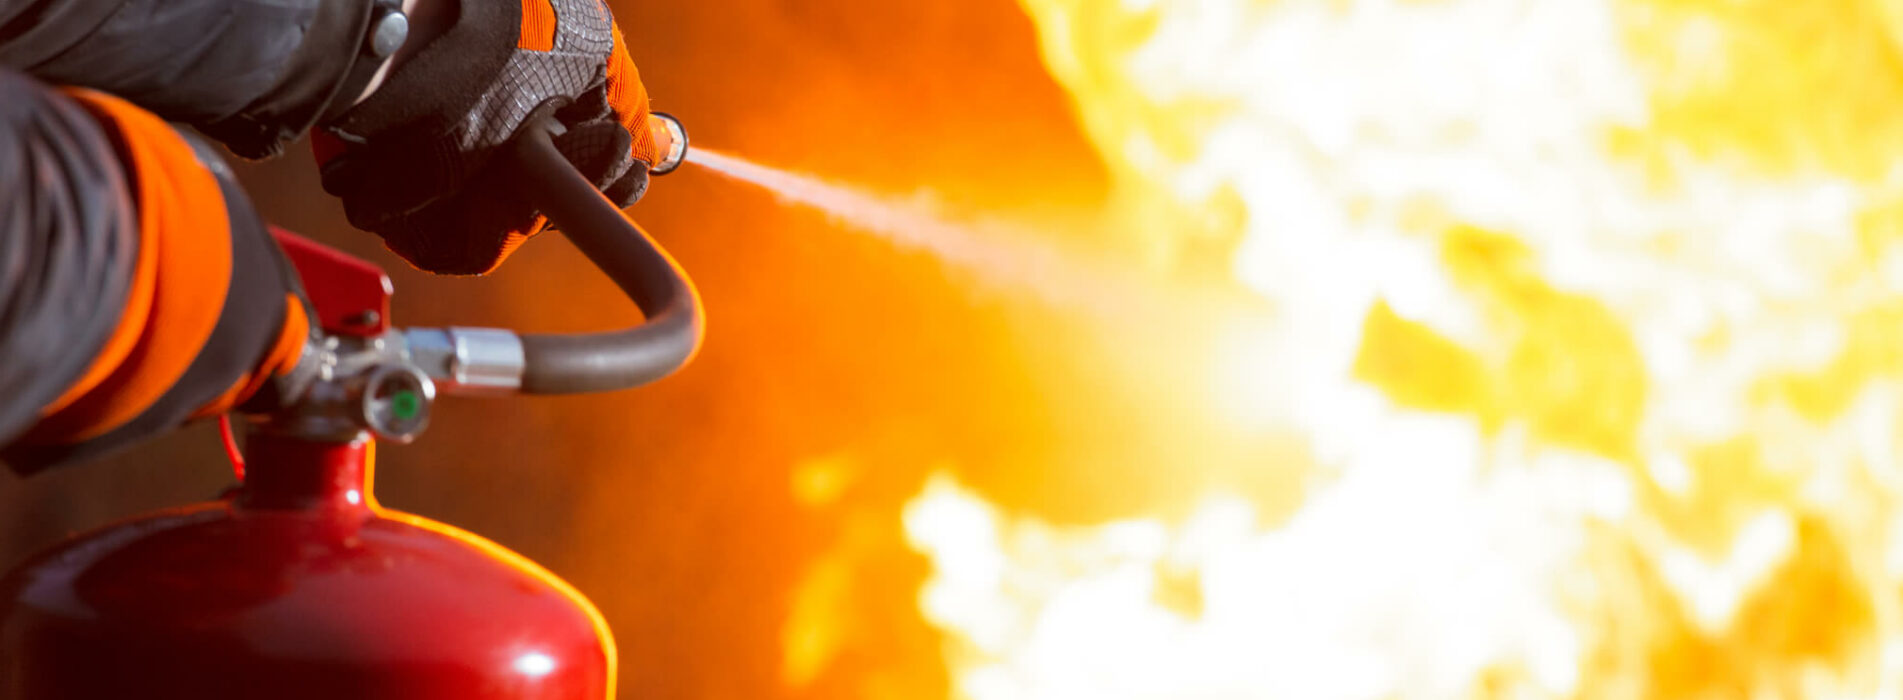 fire fighting with extinguisher